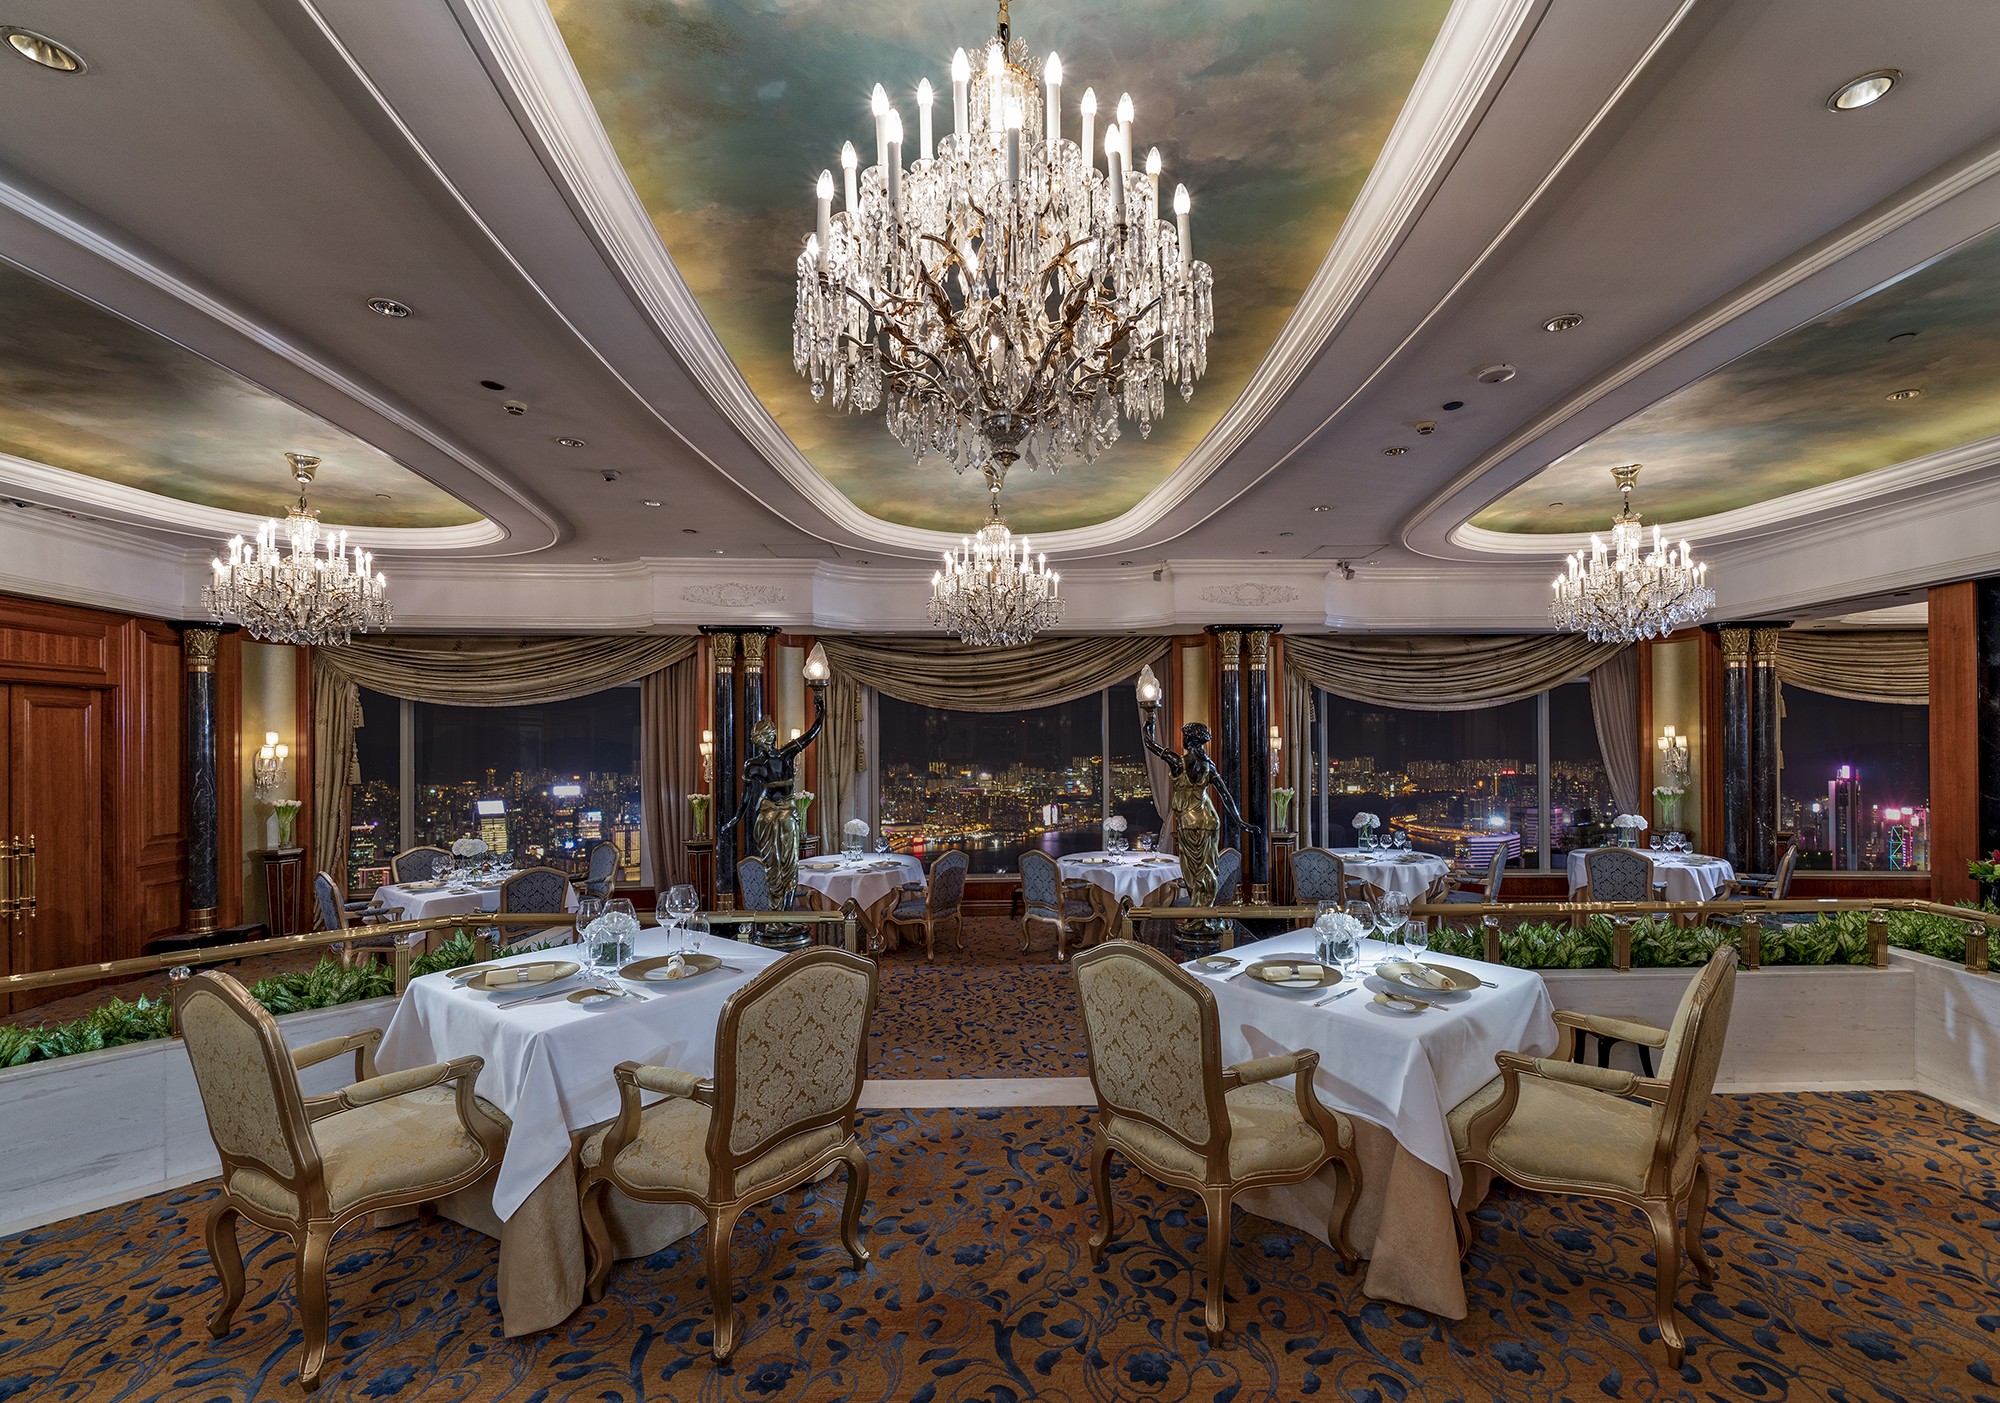 Chandeliers, marble columns and ornate cornices at Restaurant Petrus. Photos; handouts